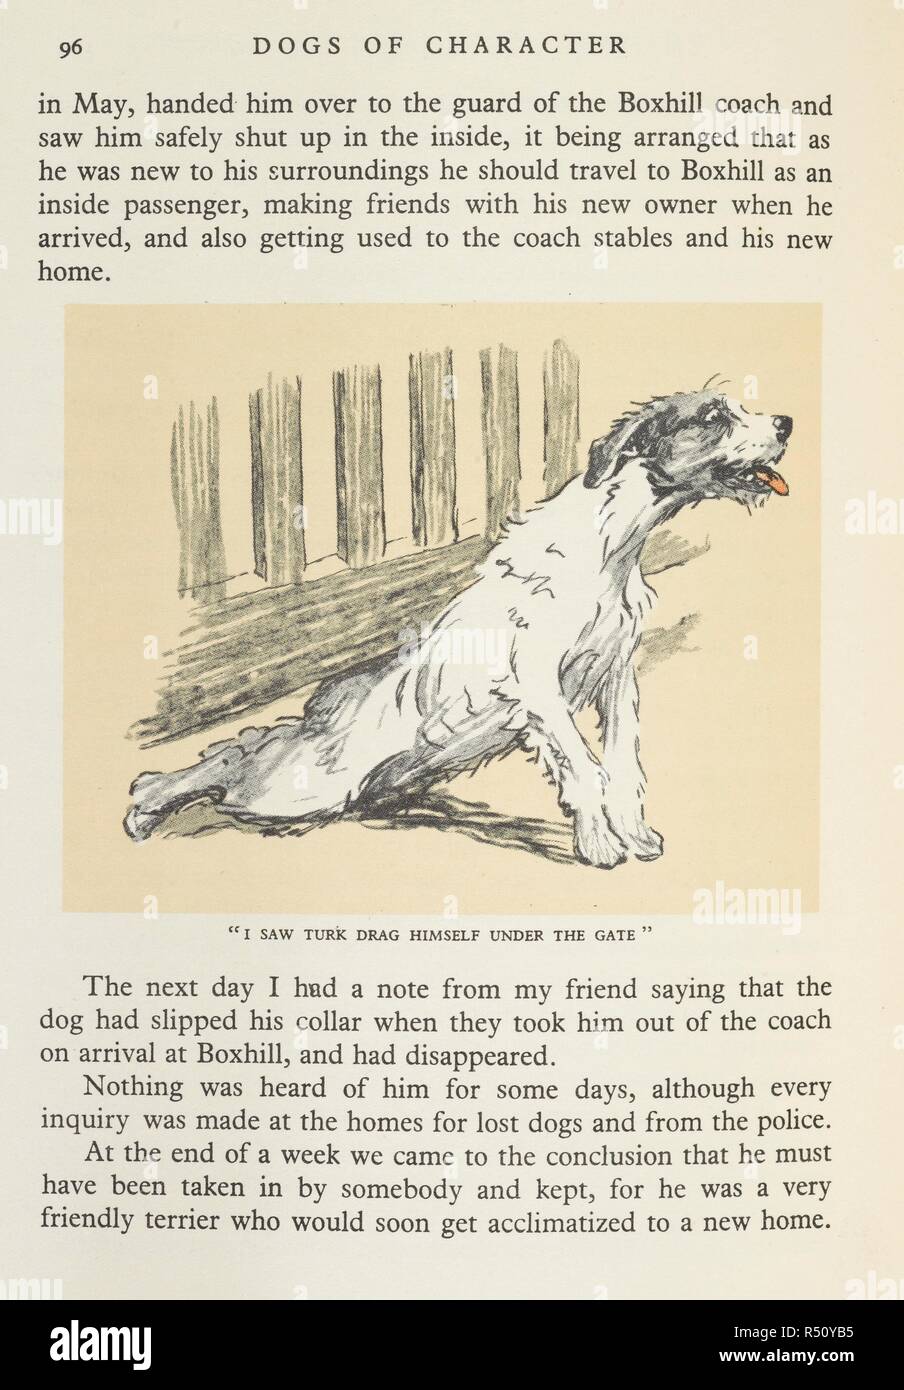 'I saw Turk drag himself under a gate'. An illustration and text. Dogs of Character. Written and illustrated by C. Aldin. Eyre & Spottiswoode: London; C. Scribners' Sons: New York, 1927. Source: 7295.i.32, page 96. Language: English. Author: ALDIN, CECIL. Stock Photo